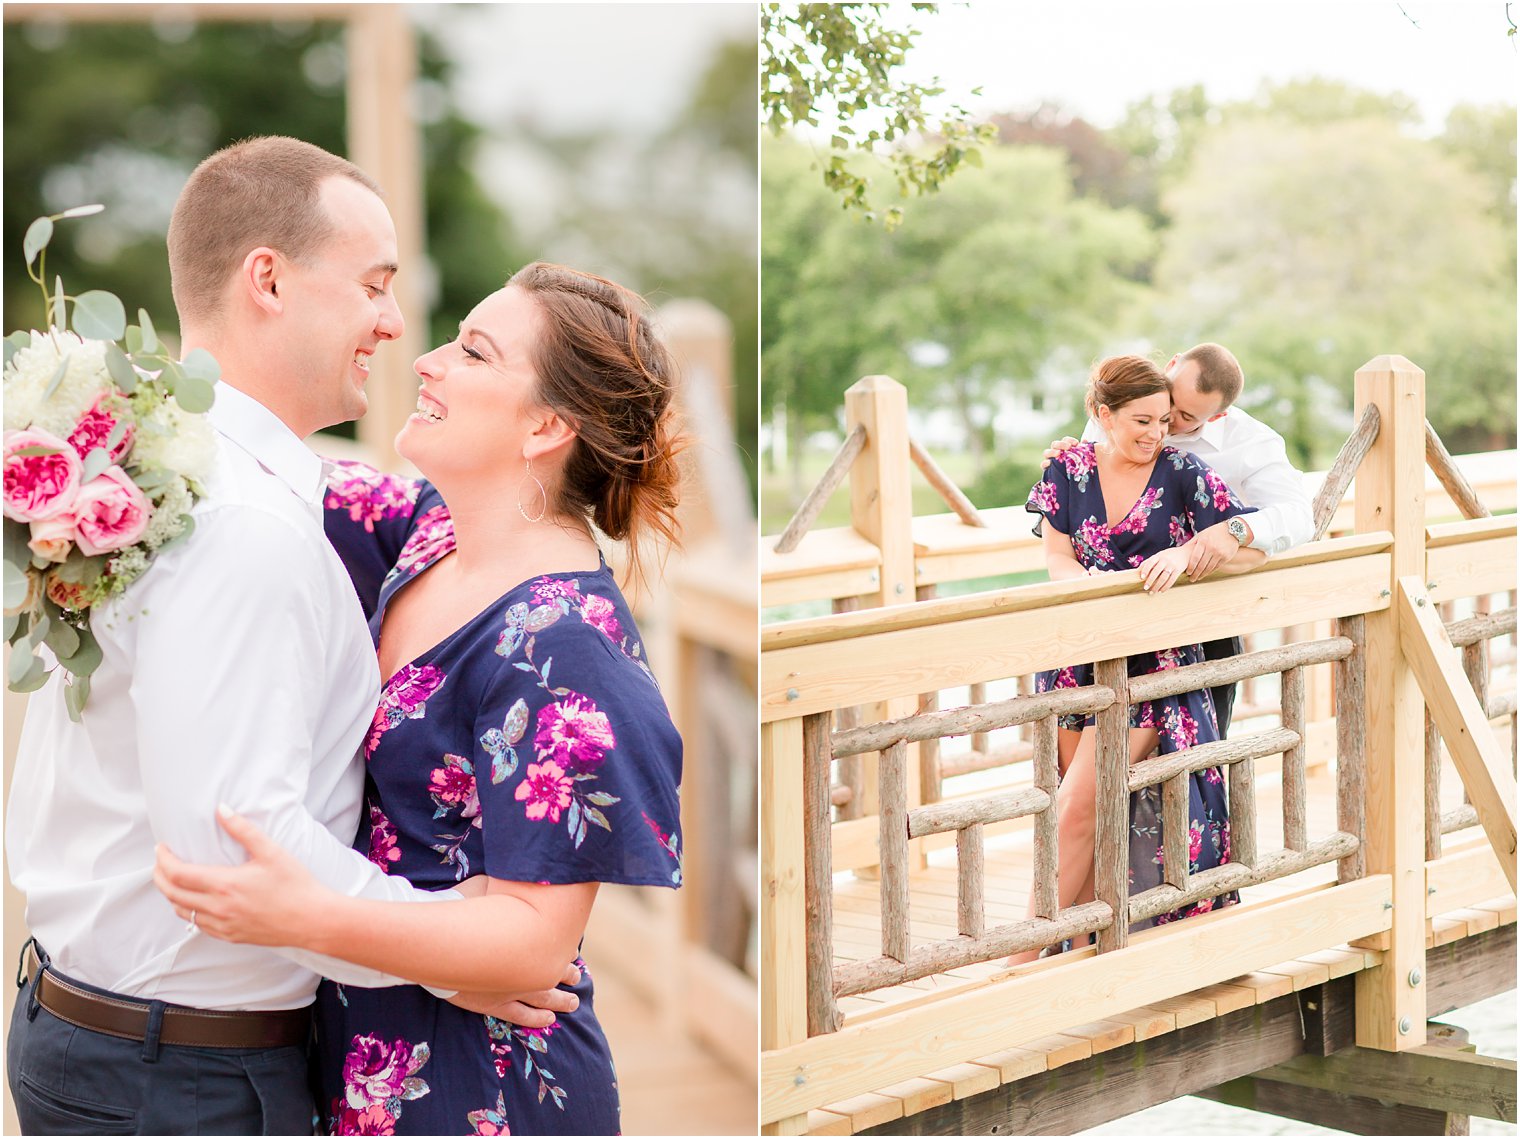 Candid engagement photographers in NJ